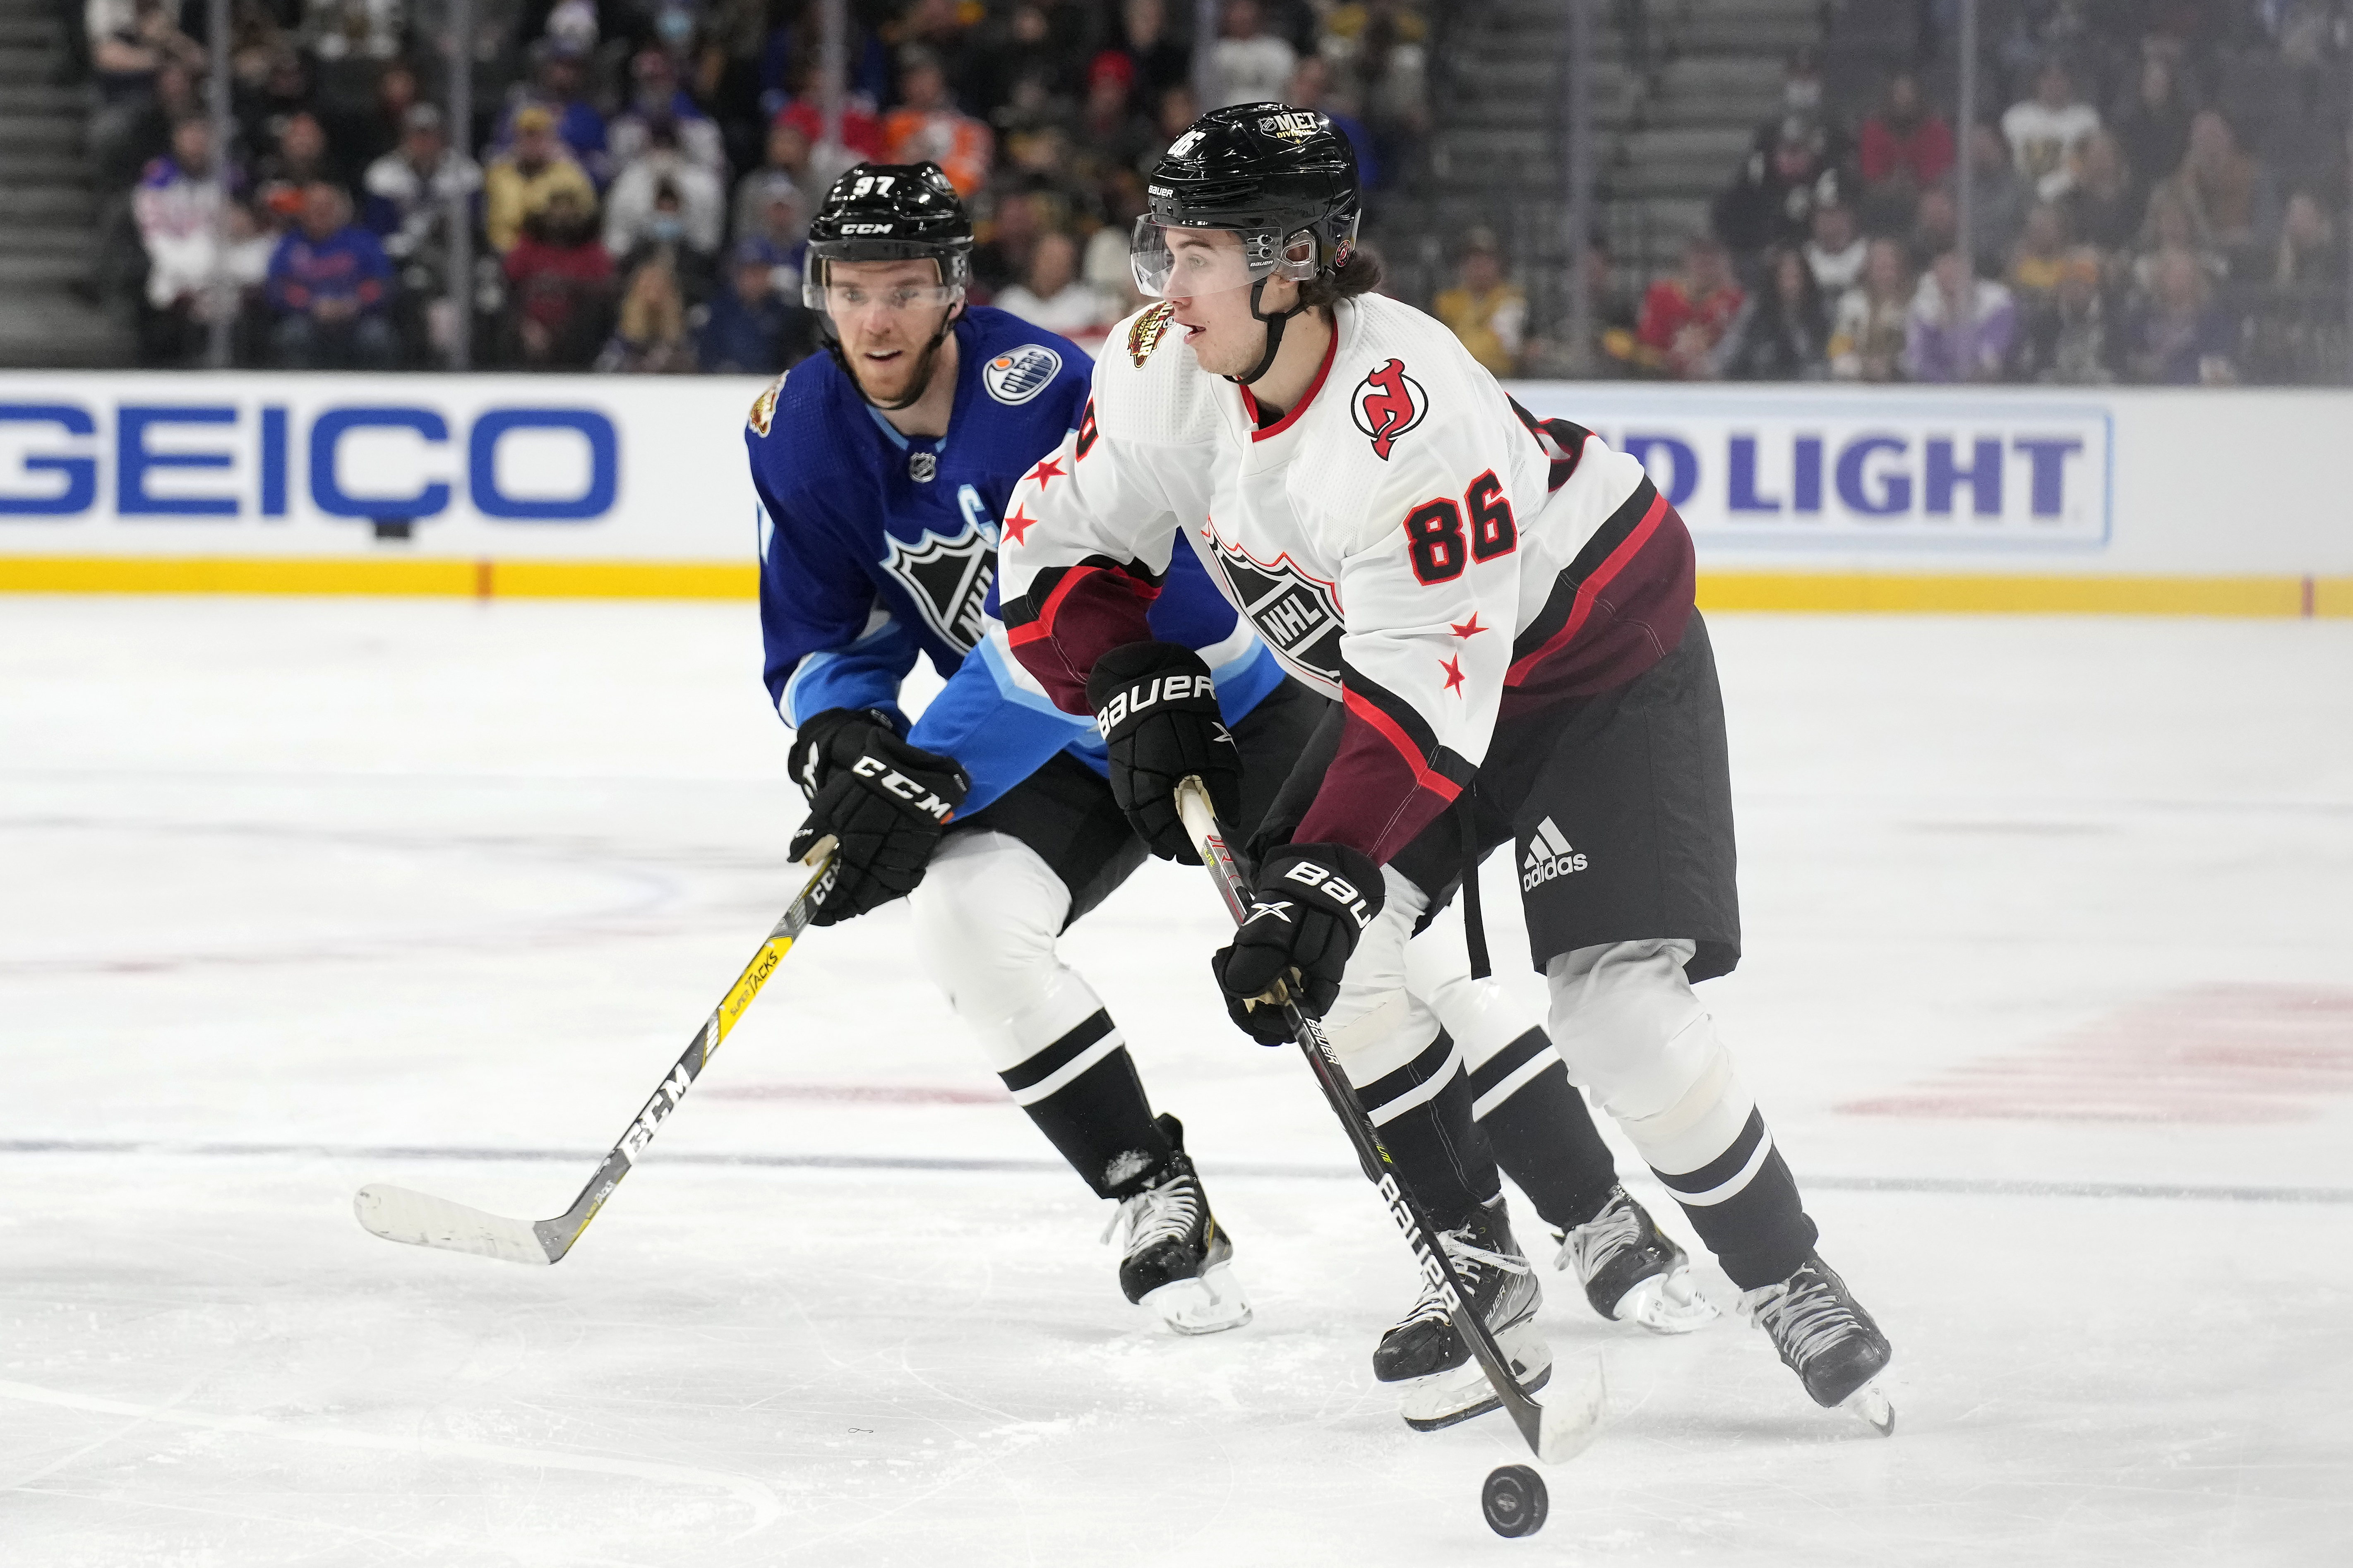 New Jersey Devils' Jack Hughes during the NHL All-Star hockey game